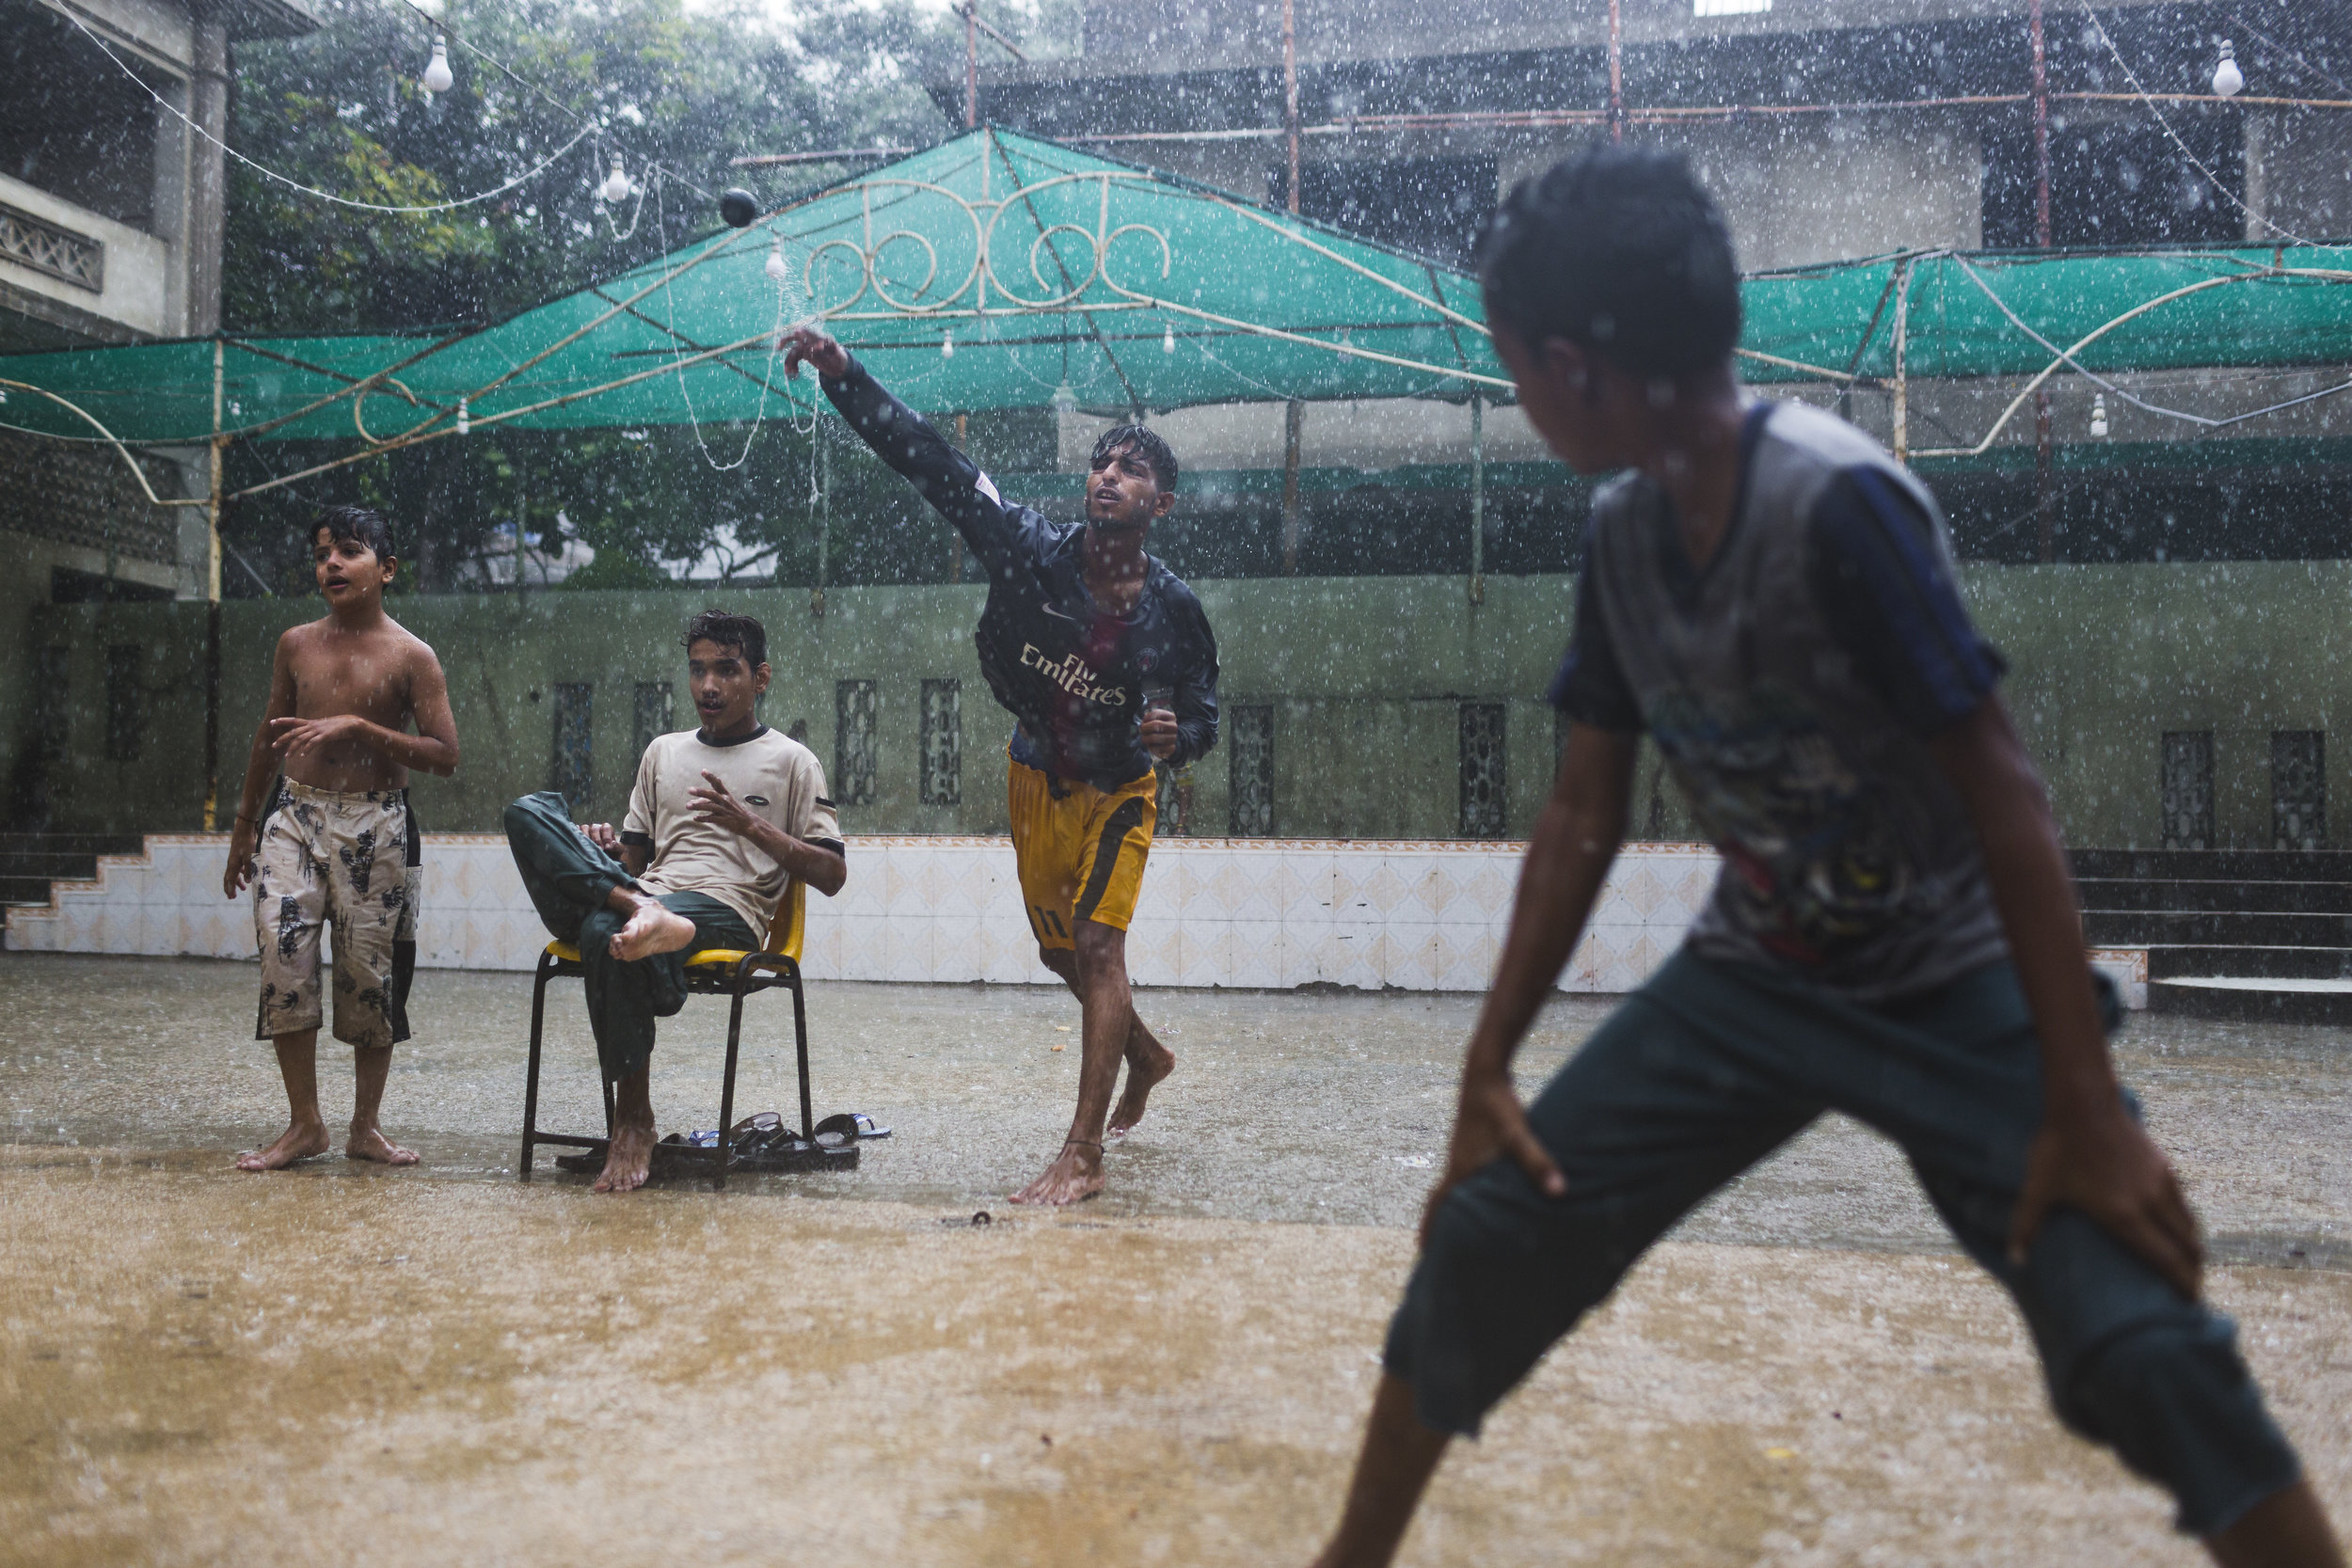  A group of boys play cricket during a torrential rainstorm in the neighborhood of Lyari, in Karachi, Pakistan on July 30, 2019.  